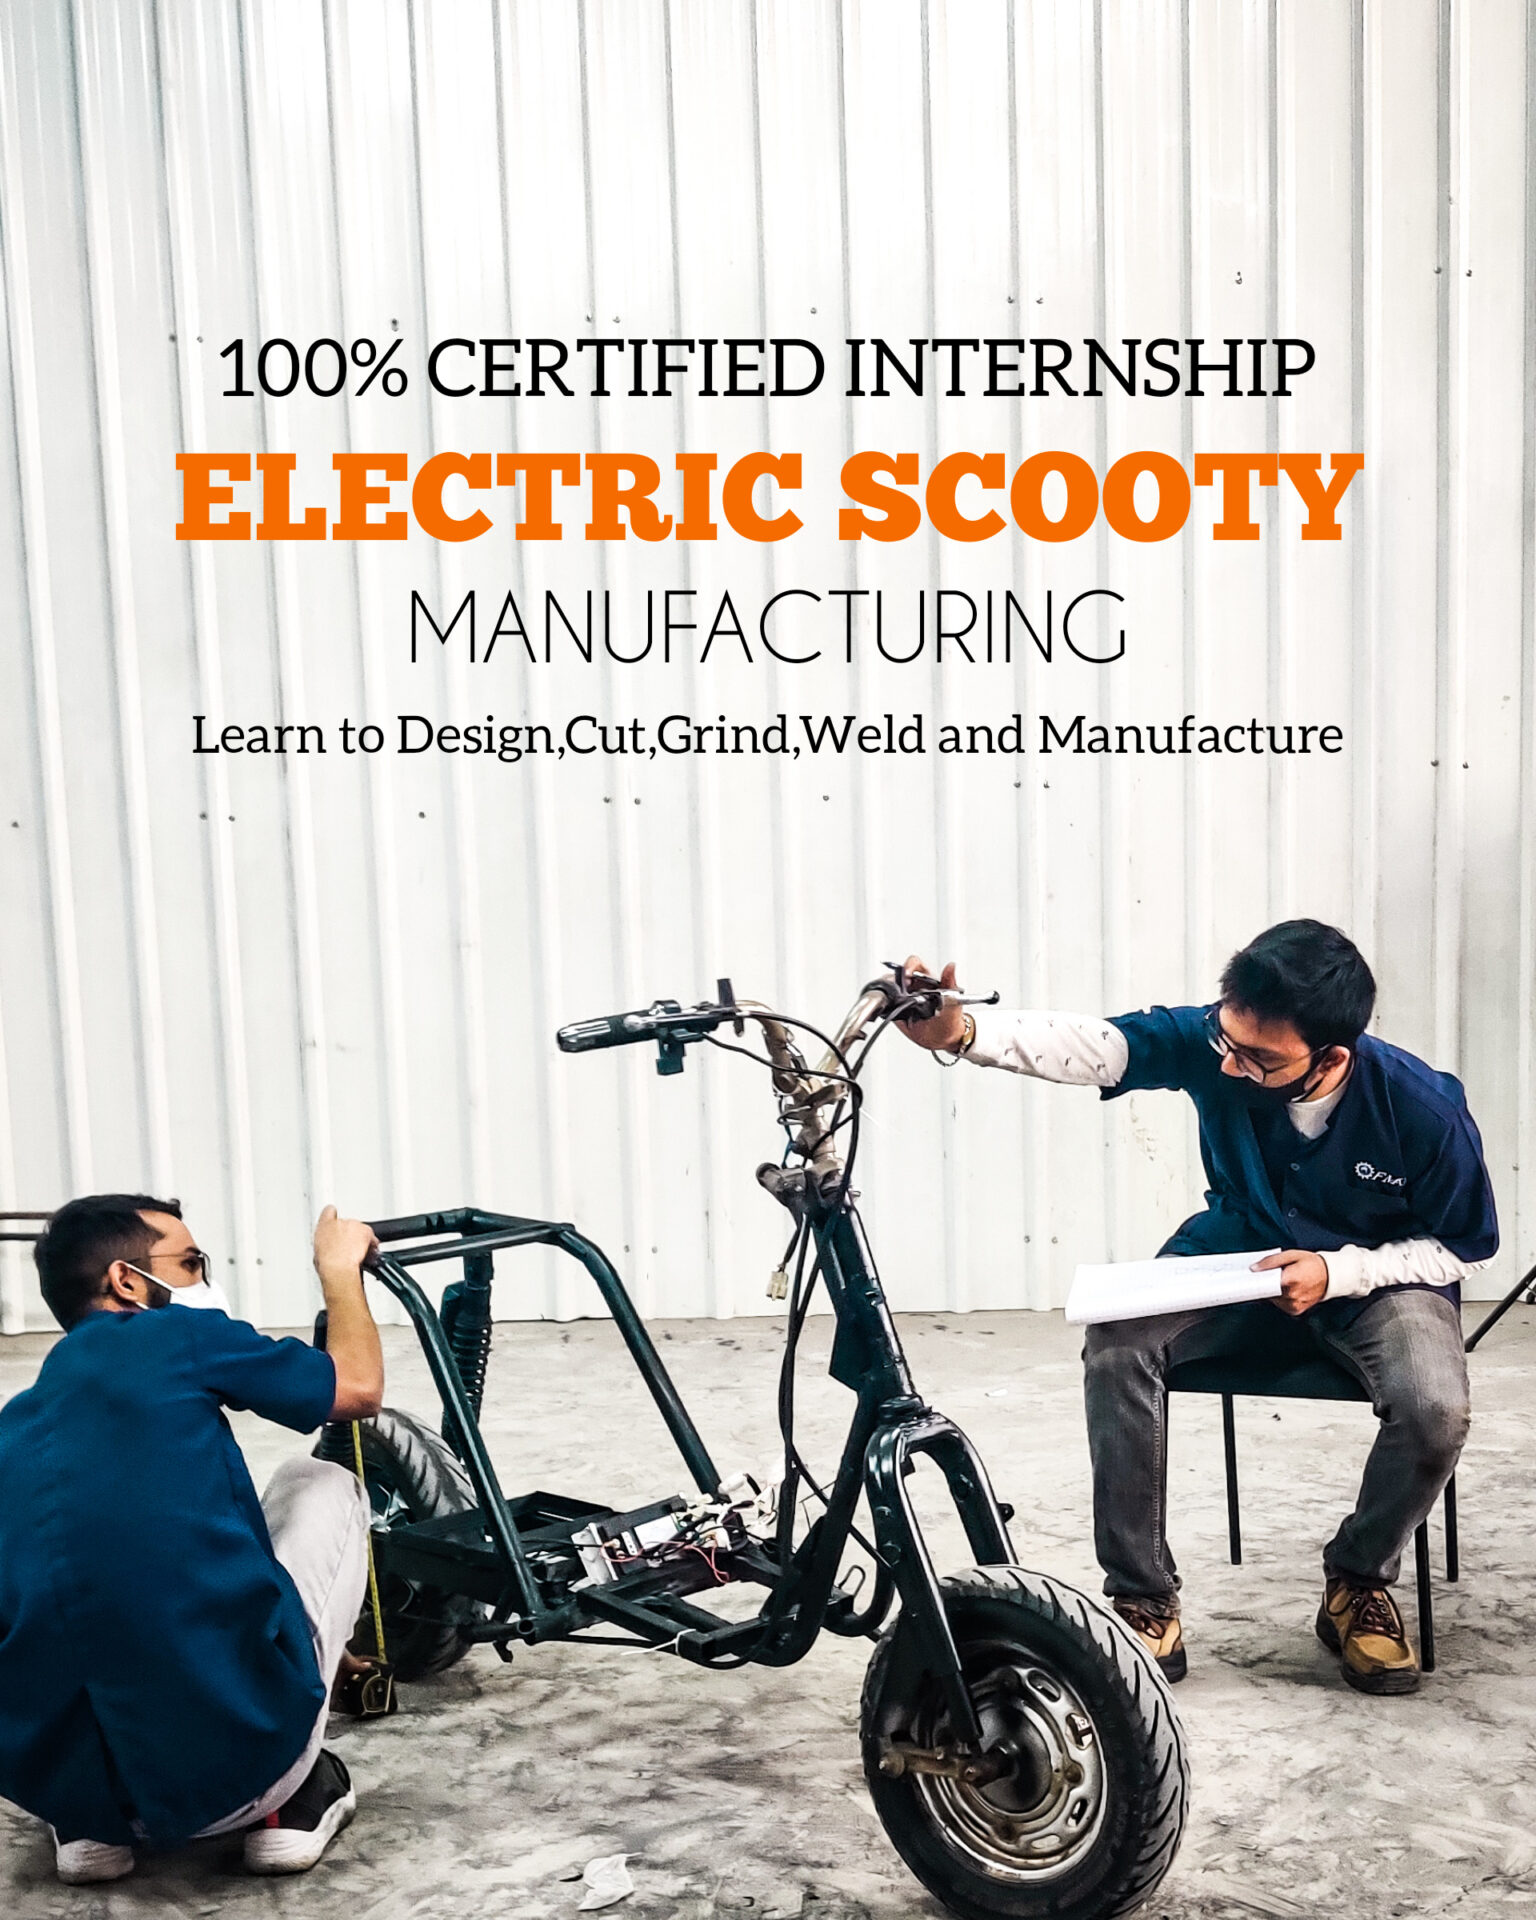 MANUFACTURING OF ELECTRIC SCOOTY